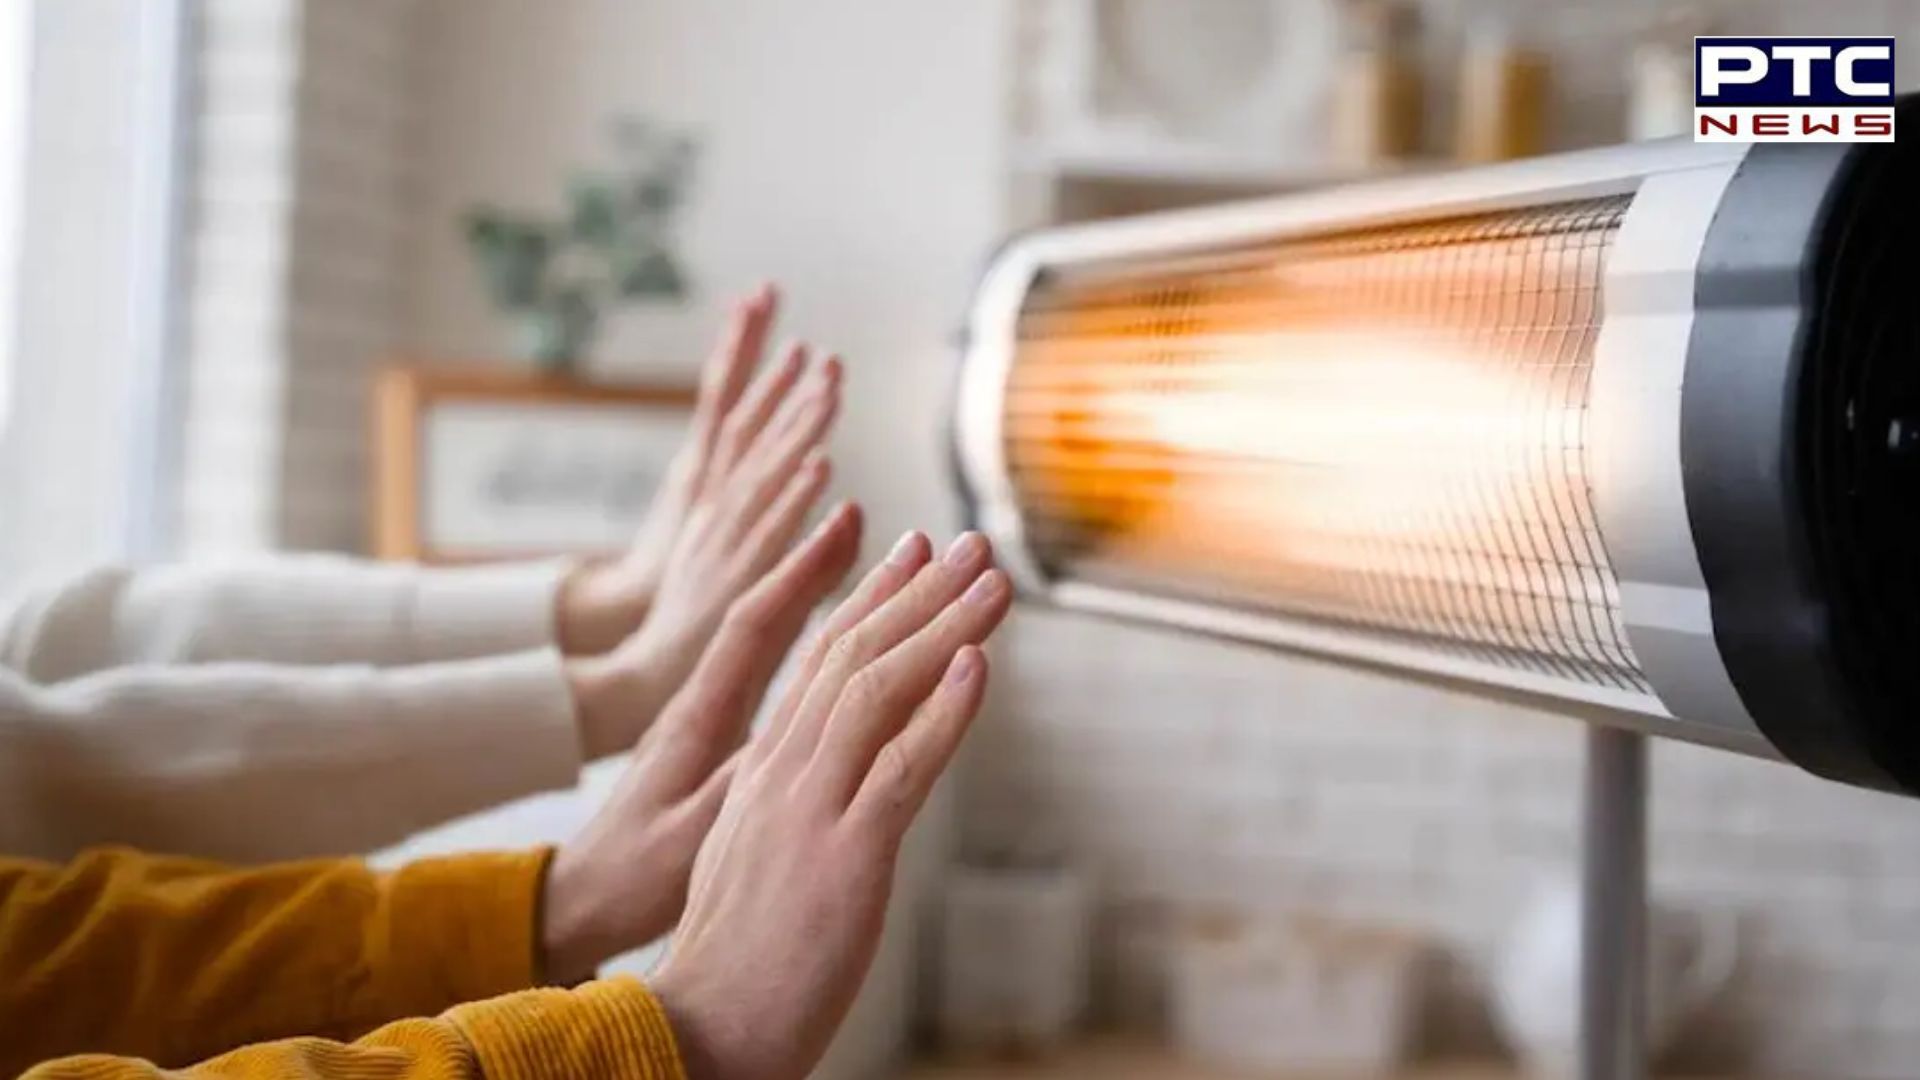 Cold wave in India: A guide to effectively using room heaters for safe winter